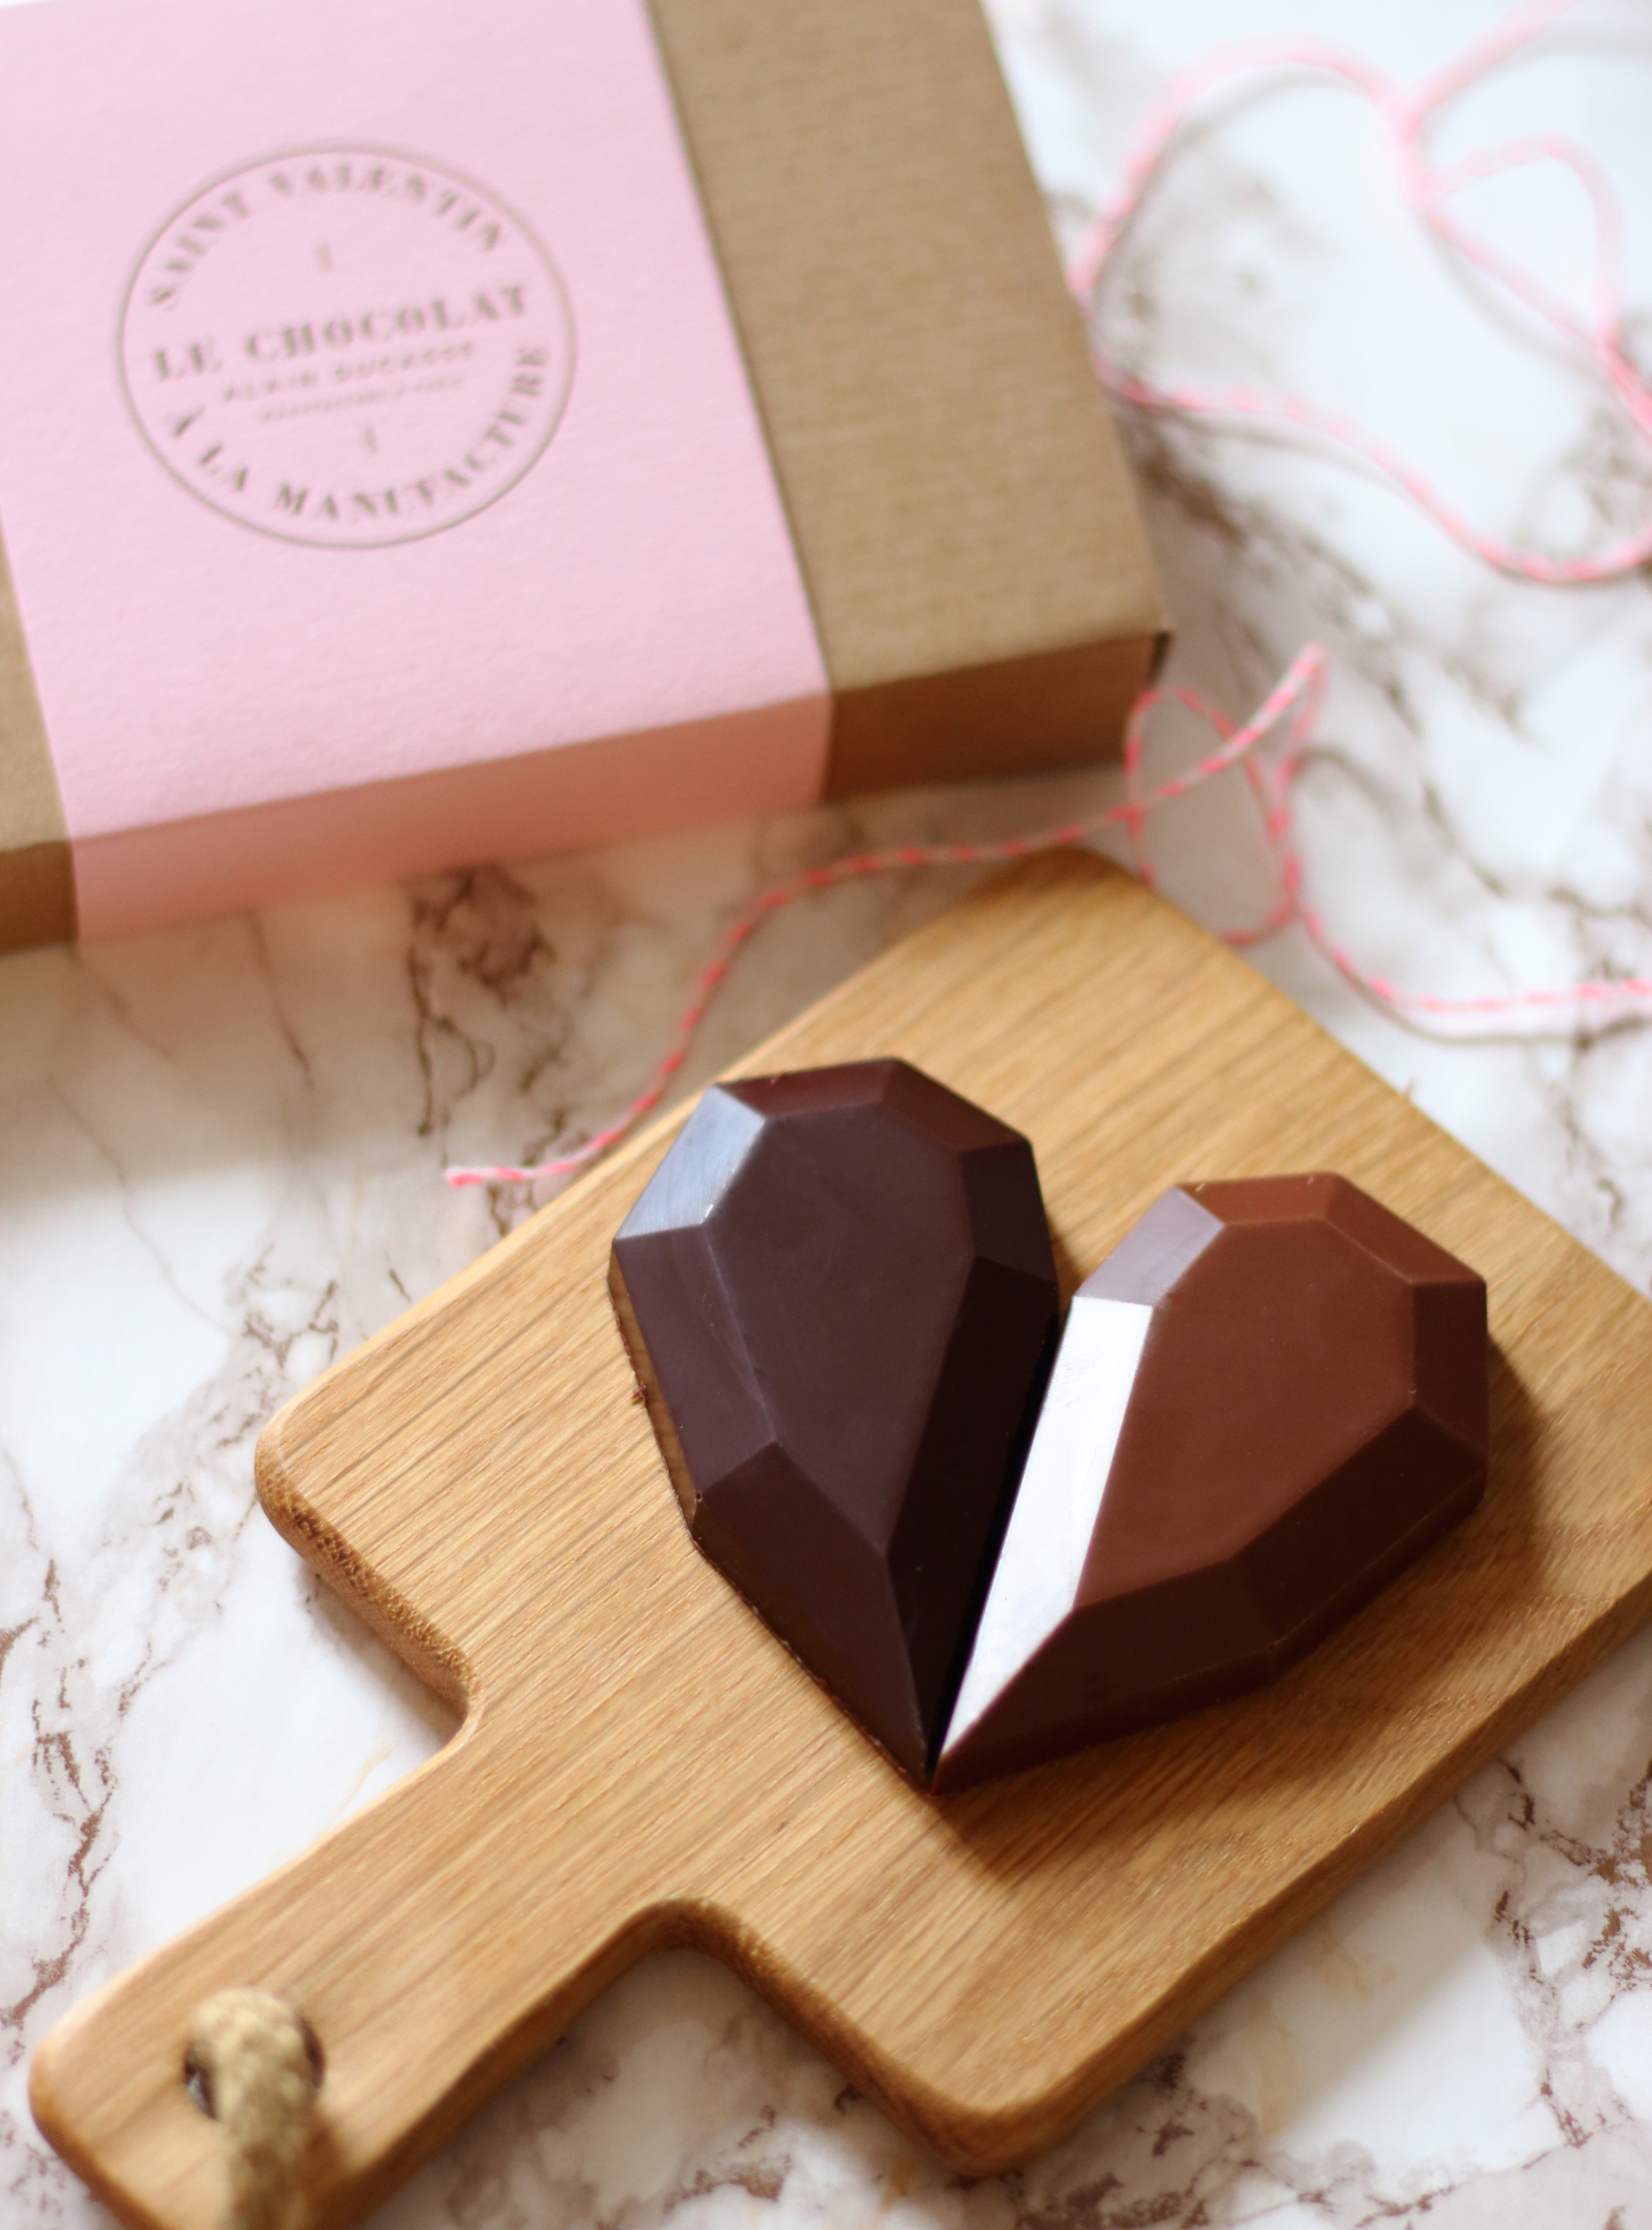 A heart to share Le Chocolat Alain Ducasse